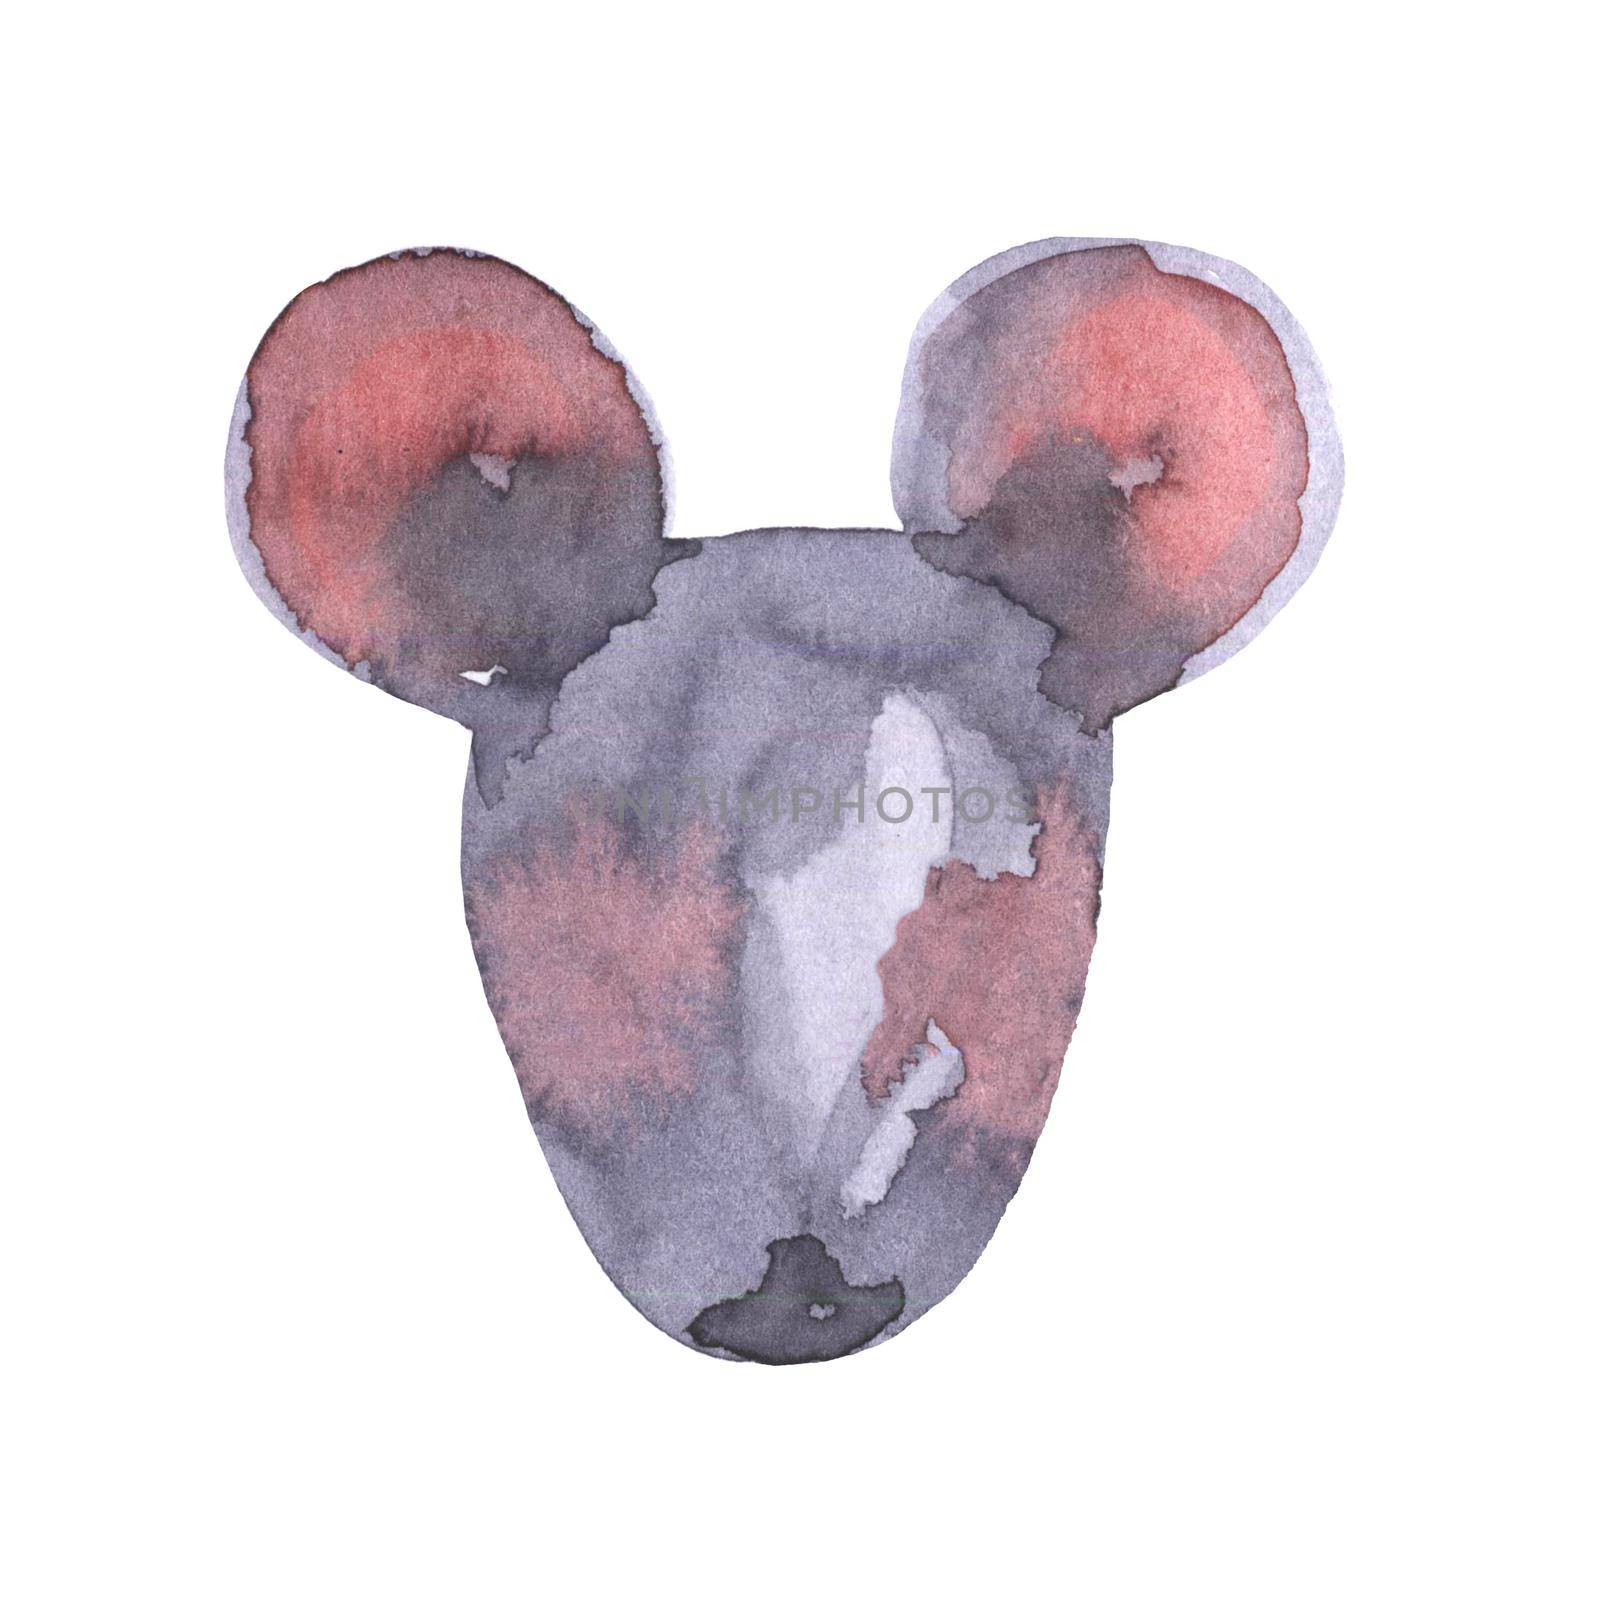 Mouse watercolour illustration. Funny icon of animal. Grey rat with pink ears isolated on white background. 2020 new year painting symbol. Drawing art object for design.